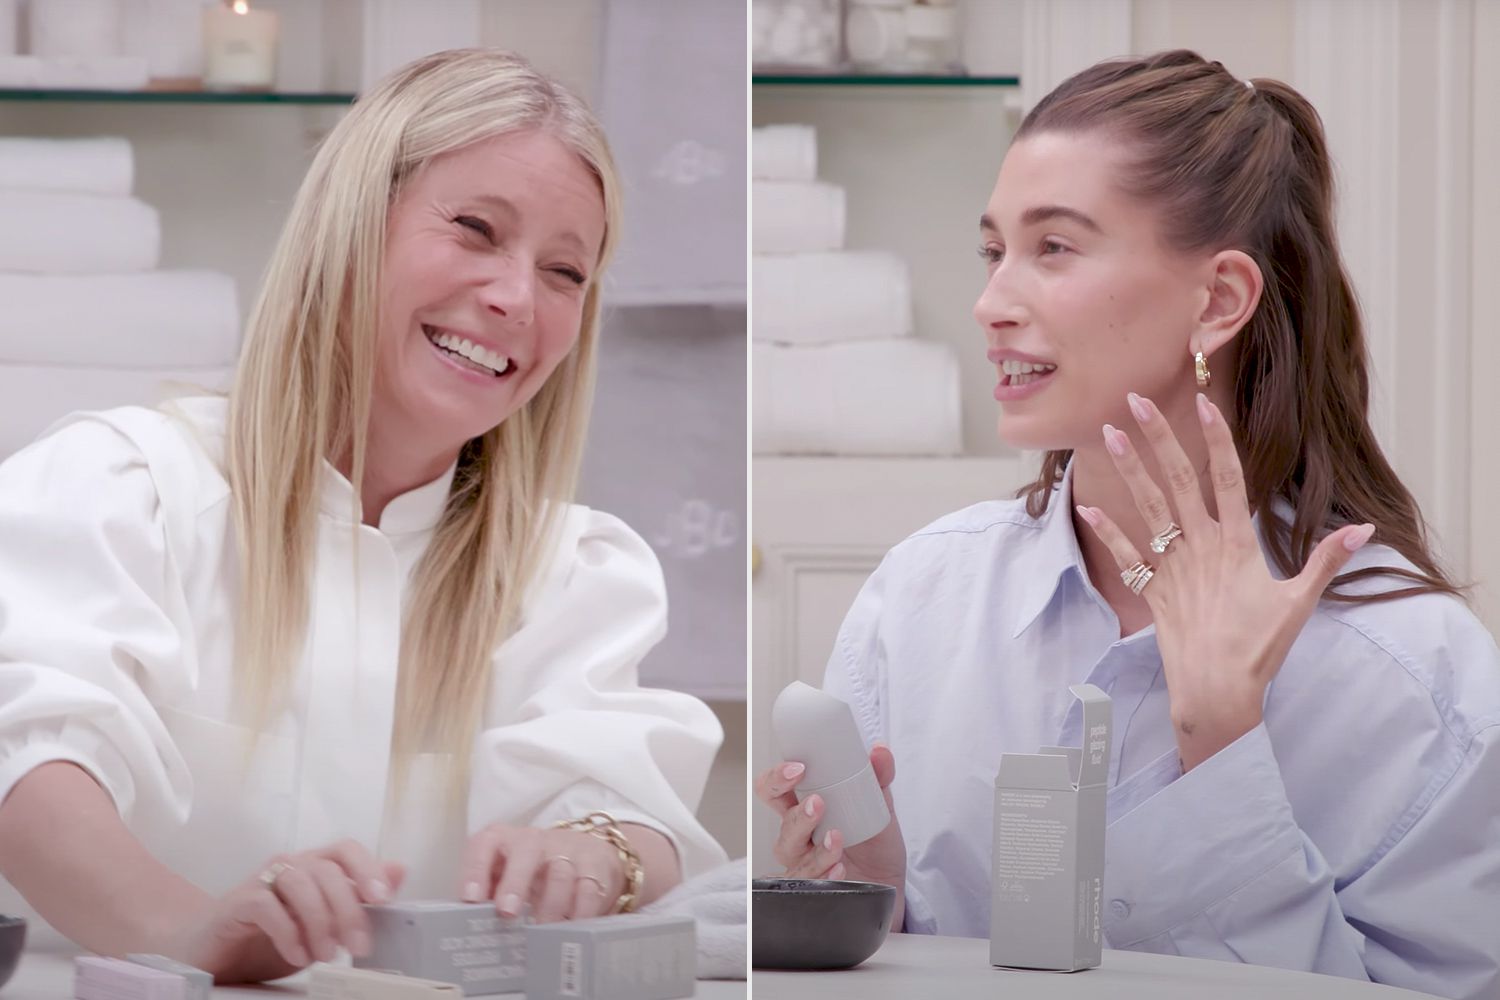 Gwyneth Paltrow Thought Hailey Bieber’s Glazed Donut Skincare Trend Was Something ‘Sexual’